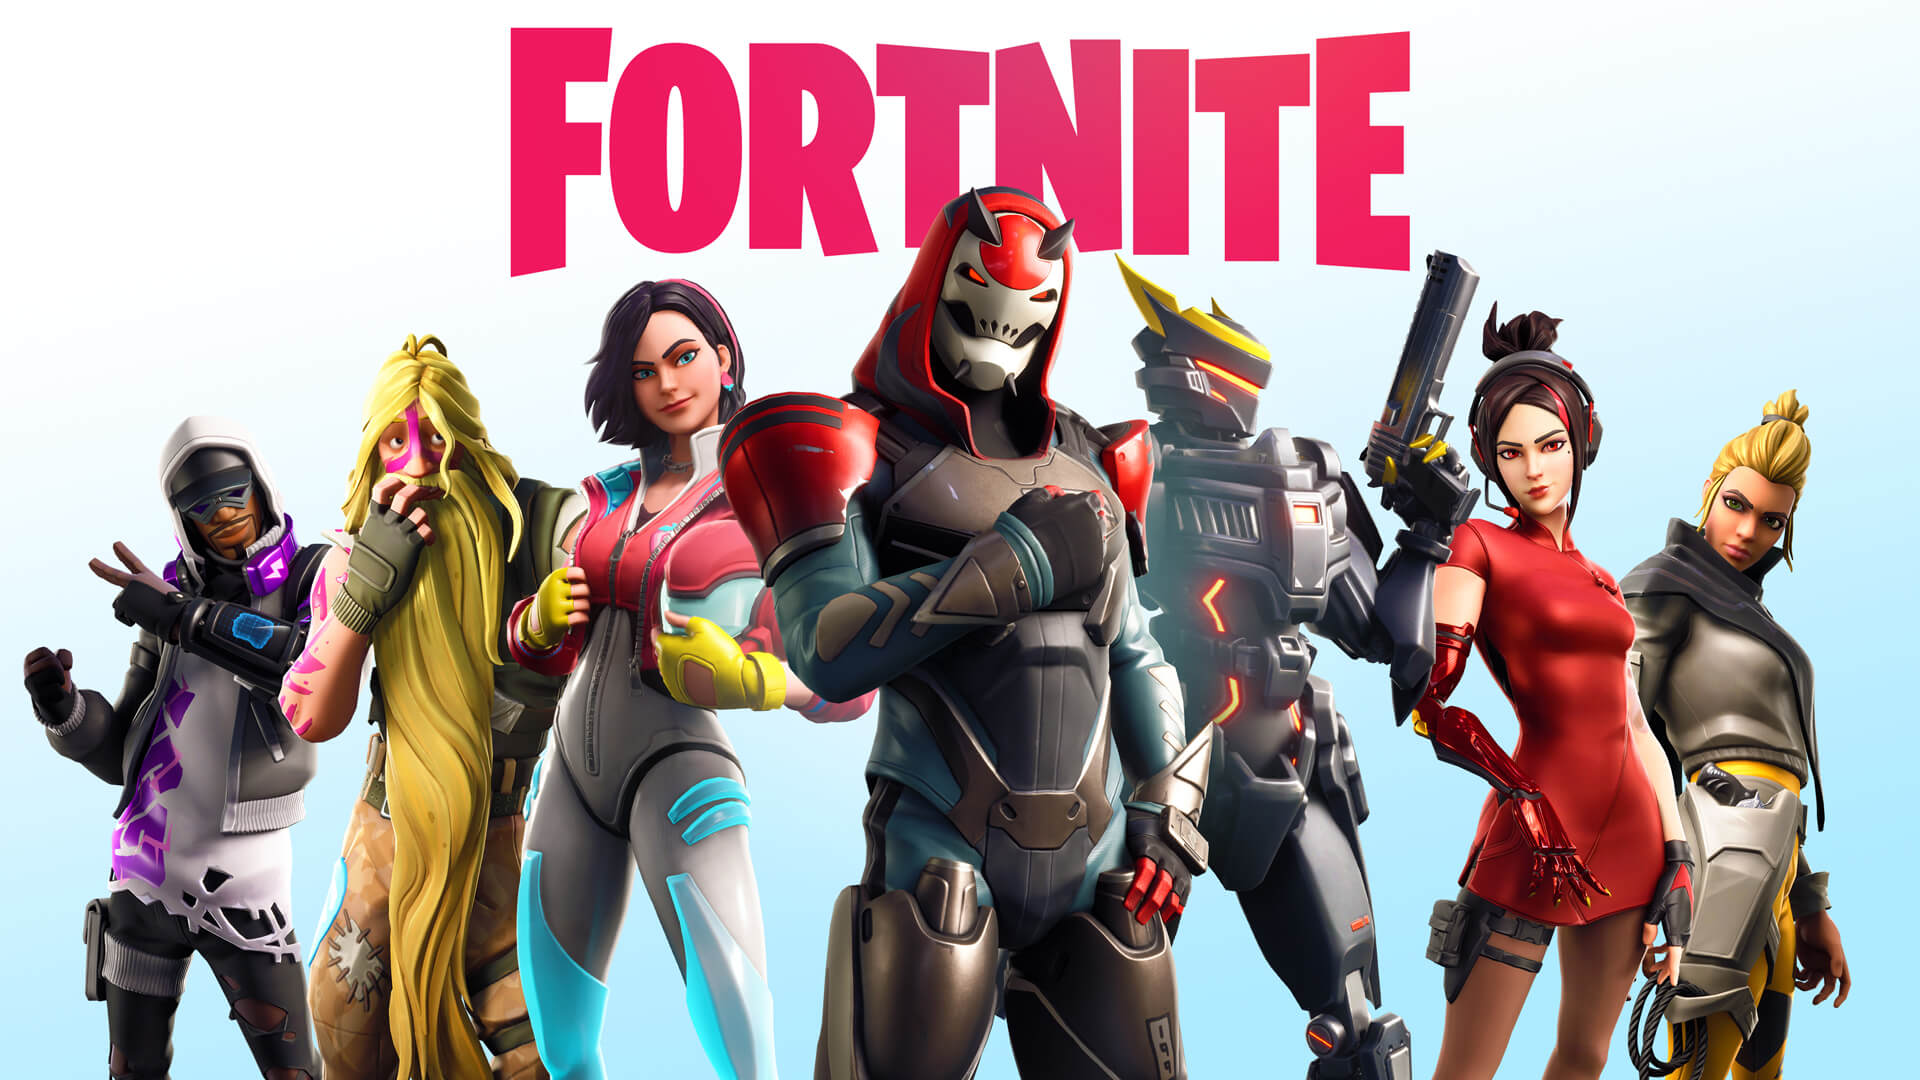 Fortnite-Season-10-Update-v10.00-Full-New-Patch-Notes-PS4-Xbox-One-PC-All-Details-Here.jpg